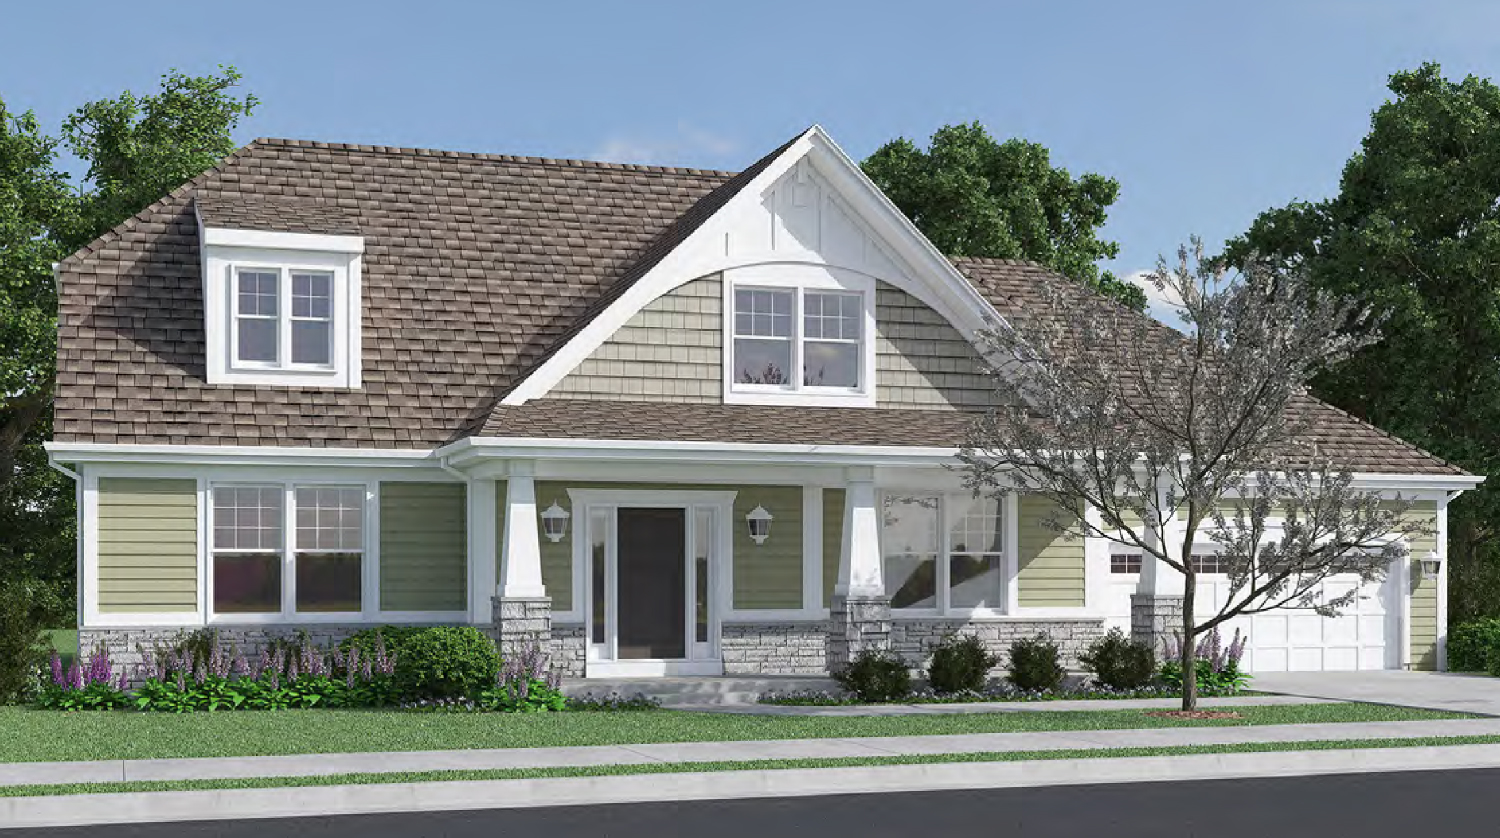 The Chestnut Hill is one of seven Garden Home plans at Stafford Place in Warrenville IL